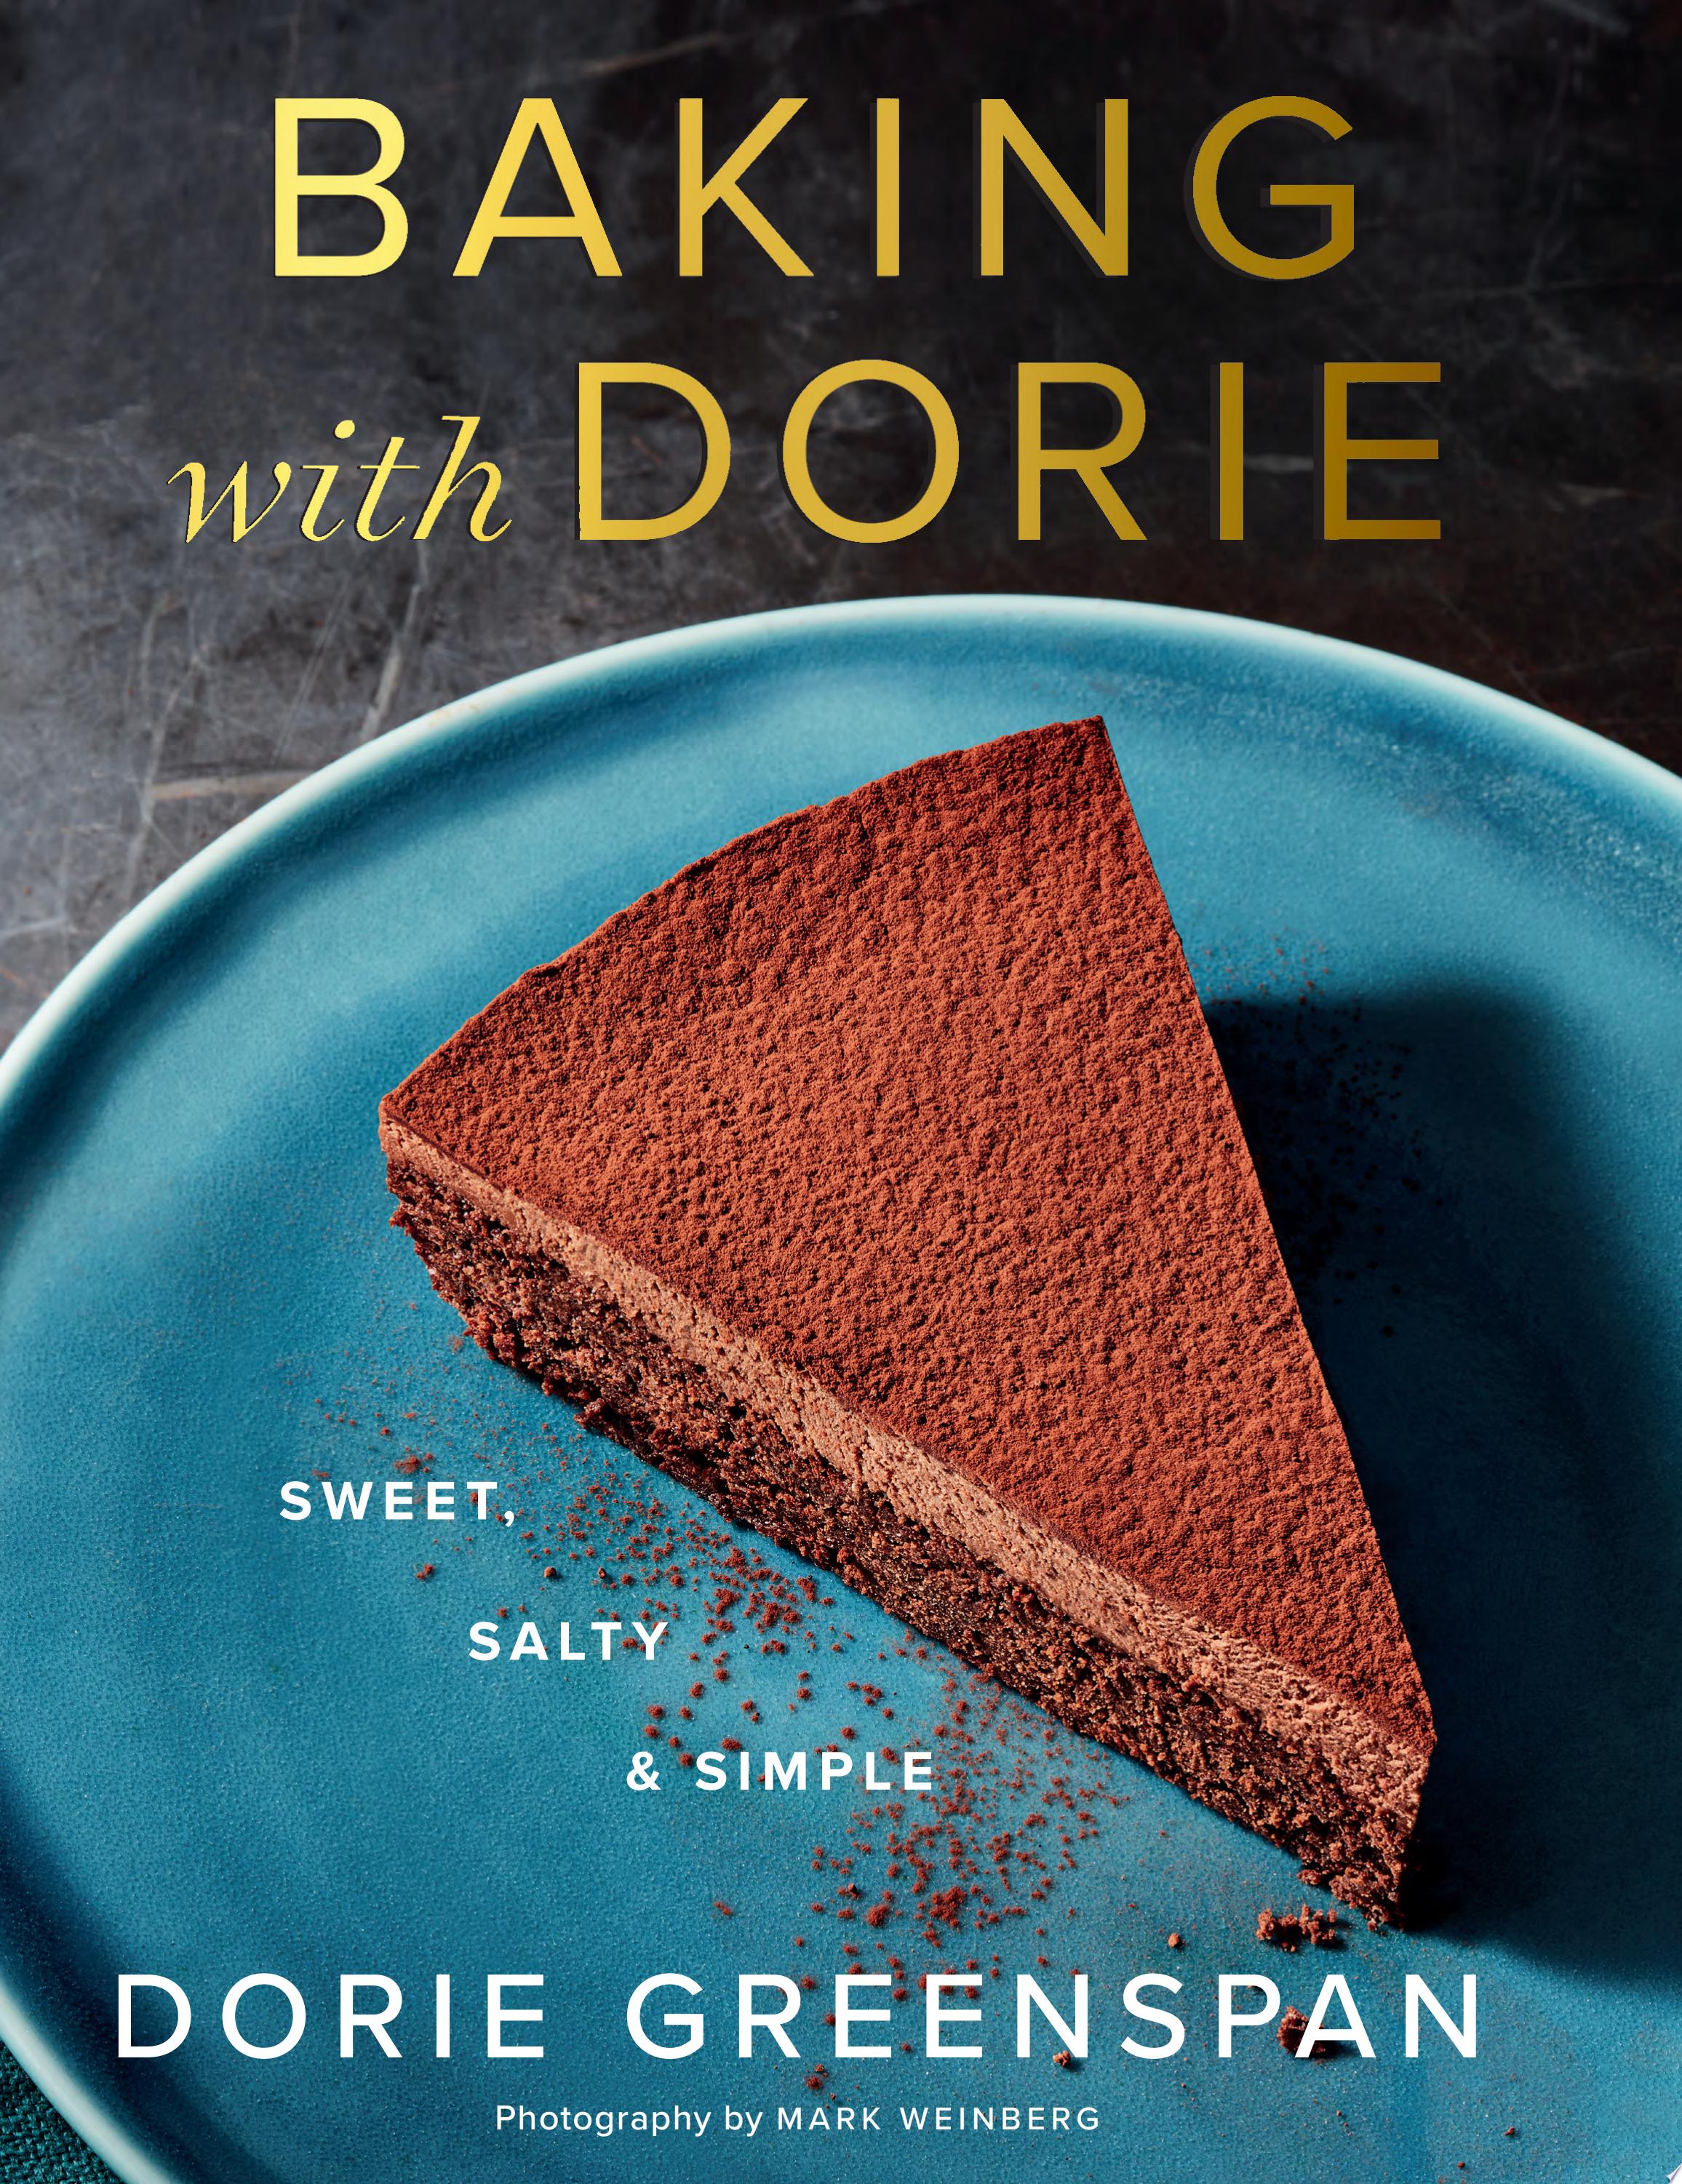 Image for "Baking with Dorie"